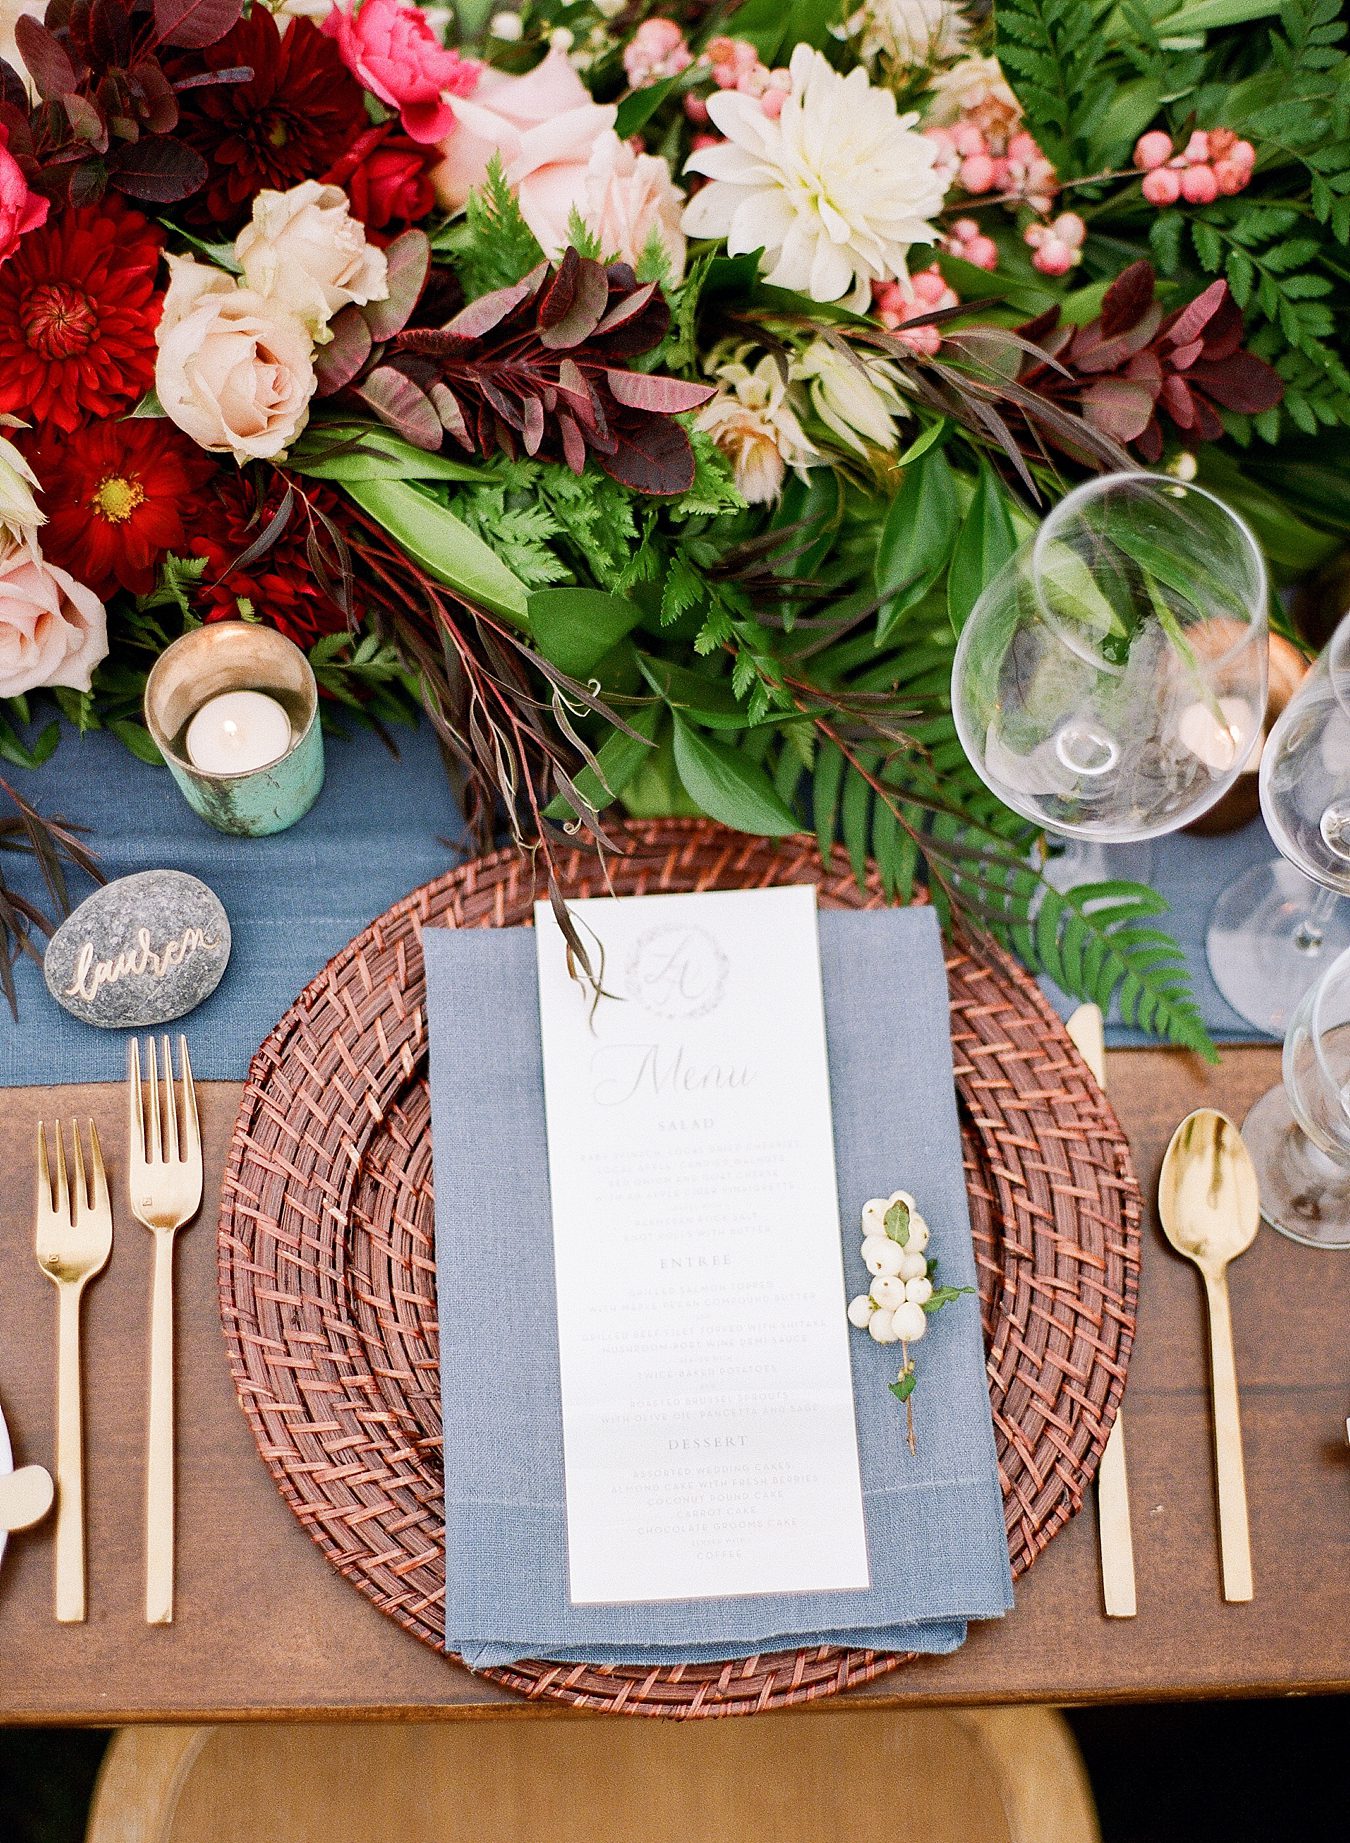 Holly Thomas Design | Cory Weber Photography | Sincerely, Ginger Event Design & Production | BLOOM Floral Design